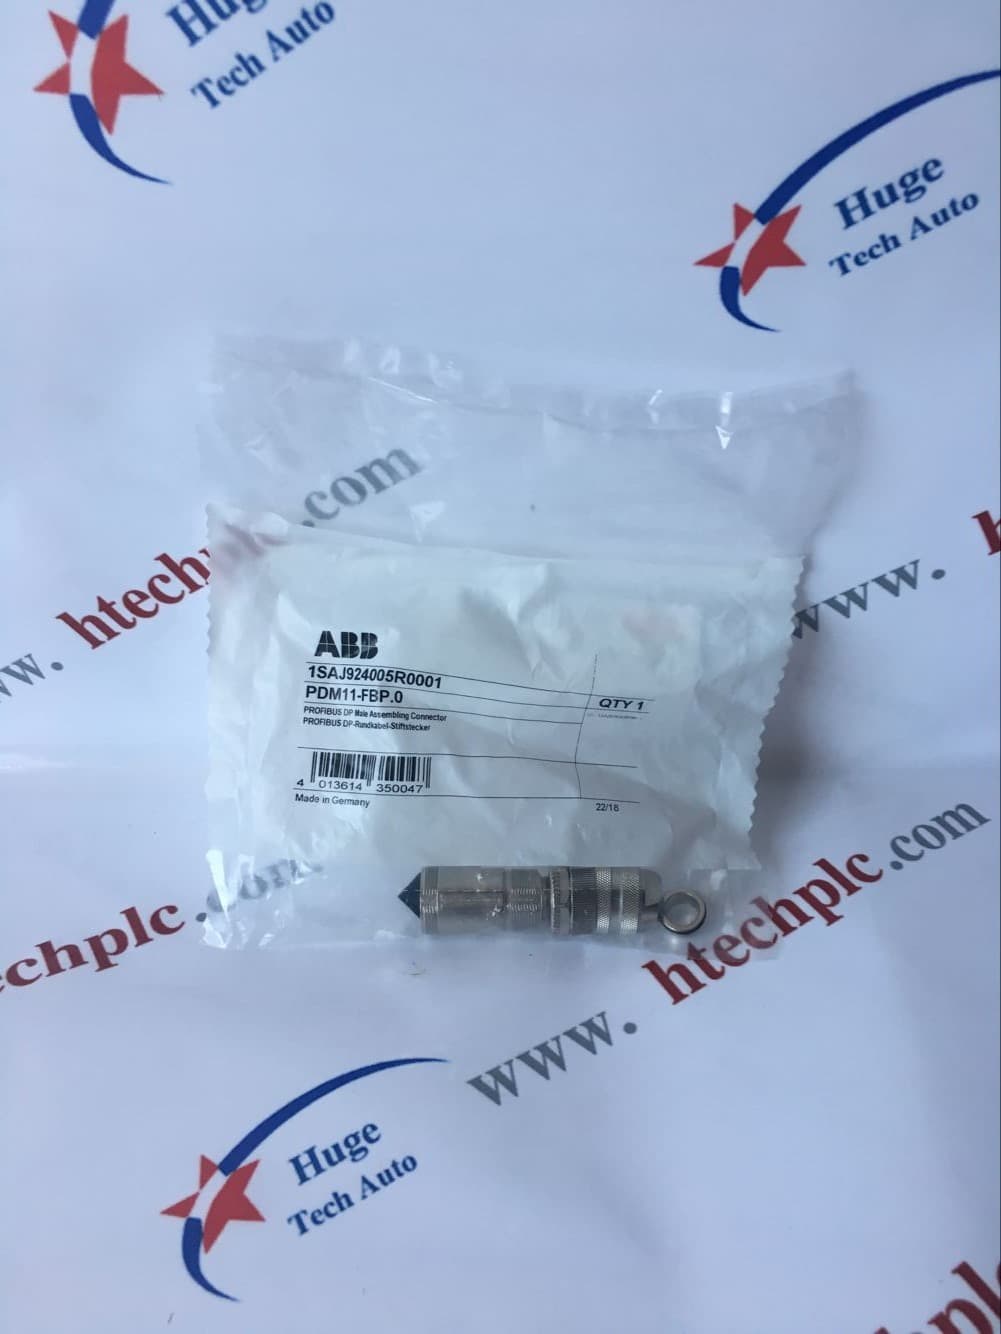 ABB 5STP 4528X0007 industrial spare parts with 12 months war